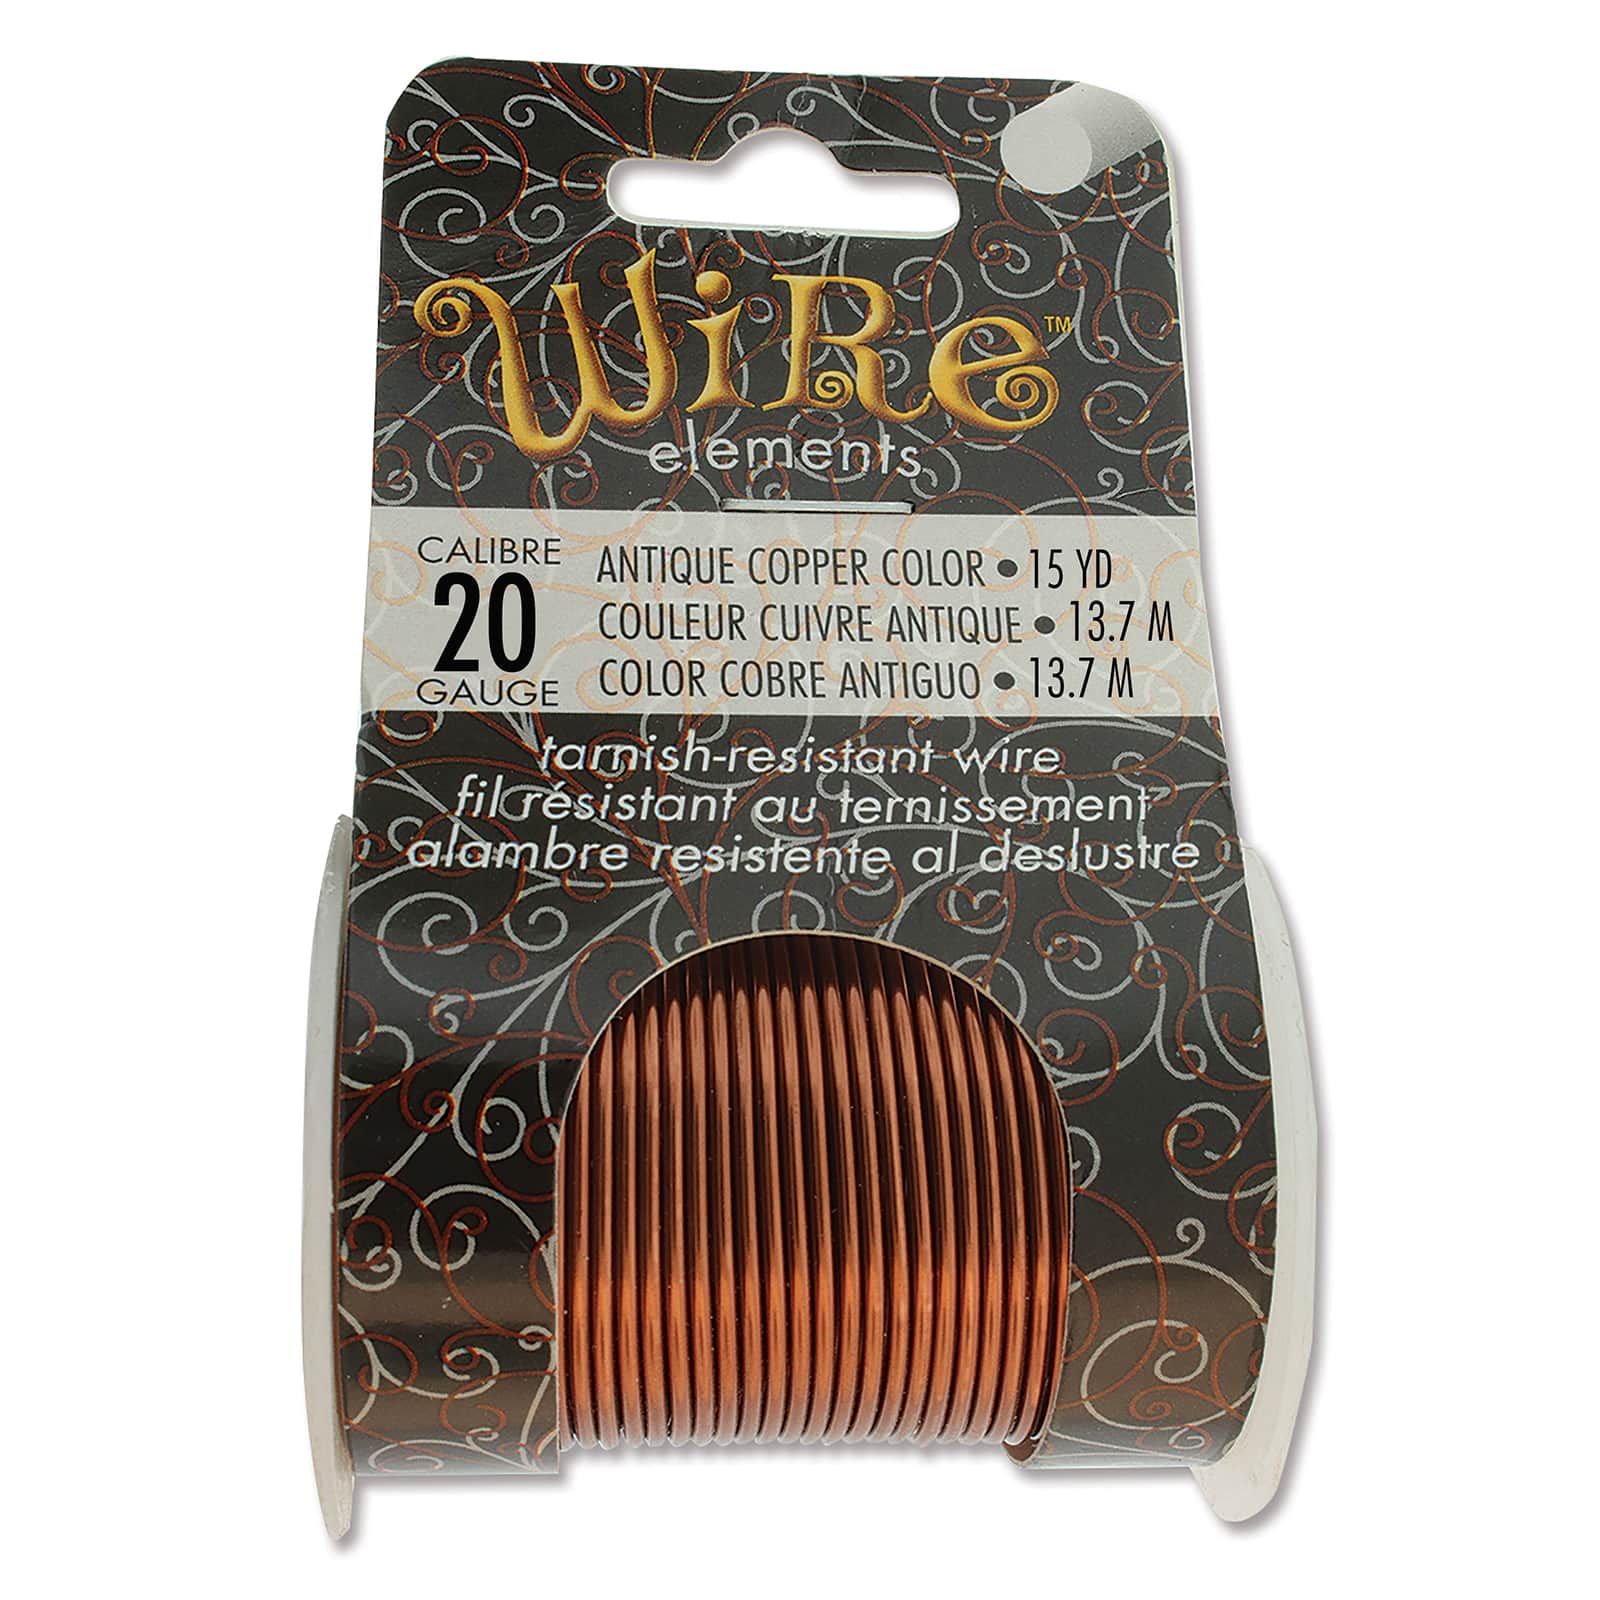 The Beadsmith Half-Round Craft Wire - Wire Elements - Medium Temper - 21  Gauge, 7 Yard Coil - Vintage Bronze Color - Beading Wire Used for Jewelry  Making, Wire Wrapping, and Other